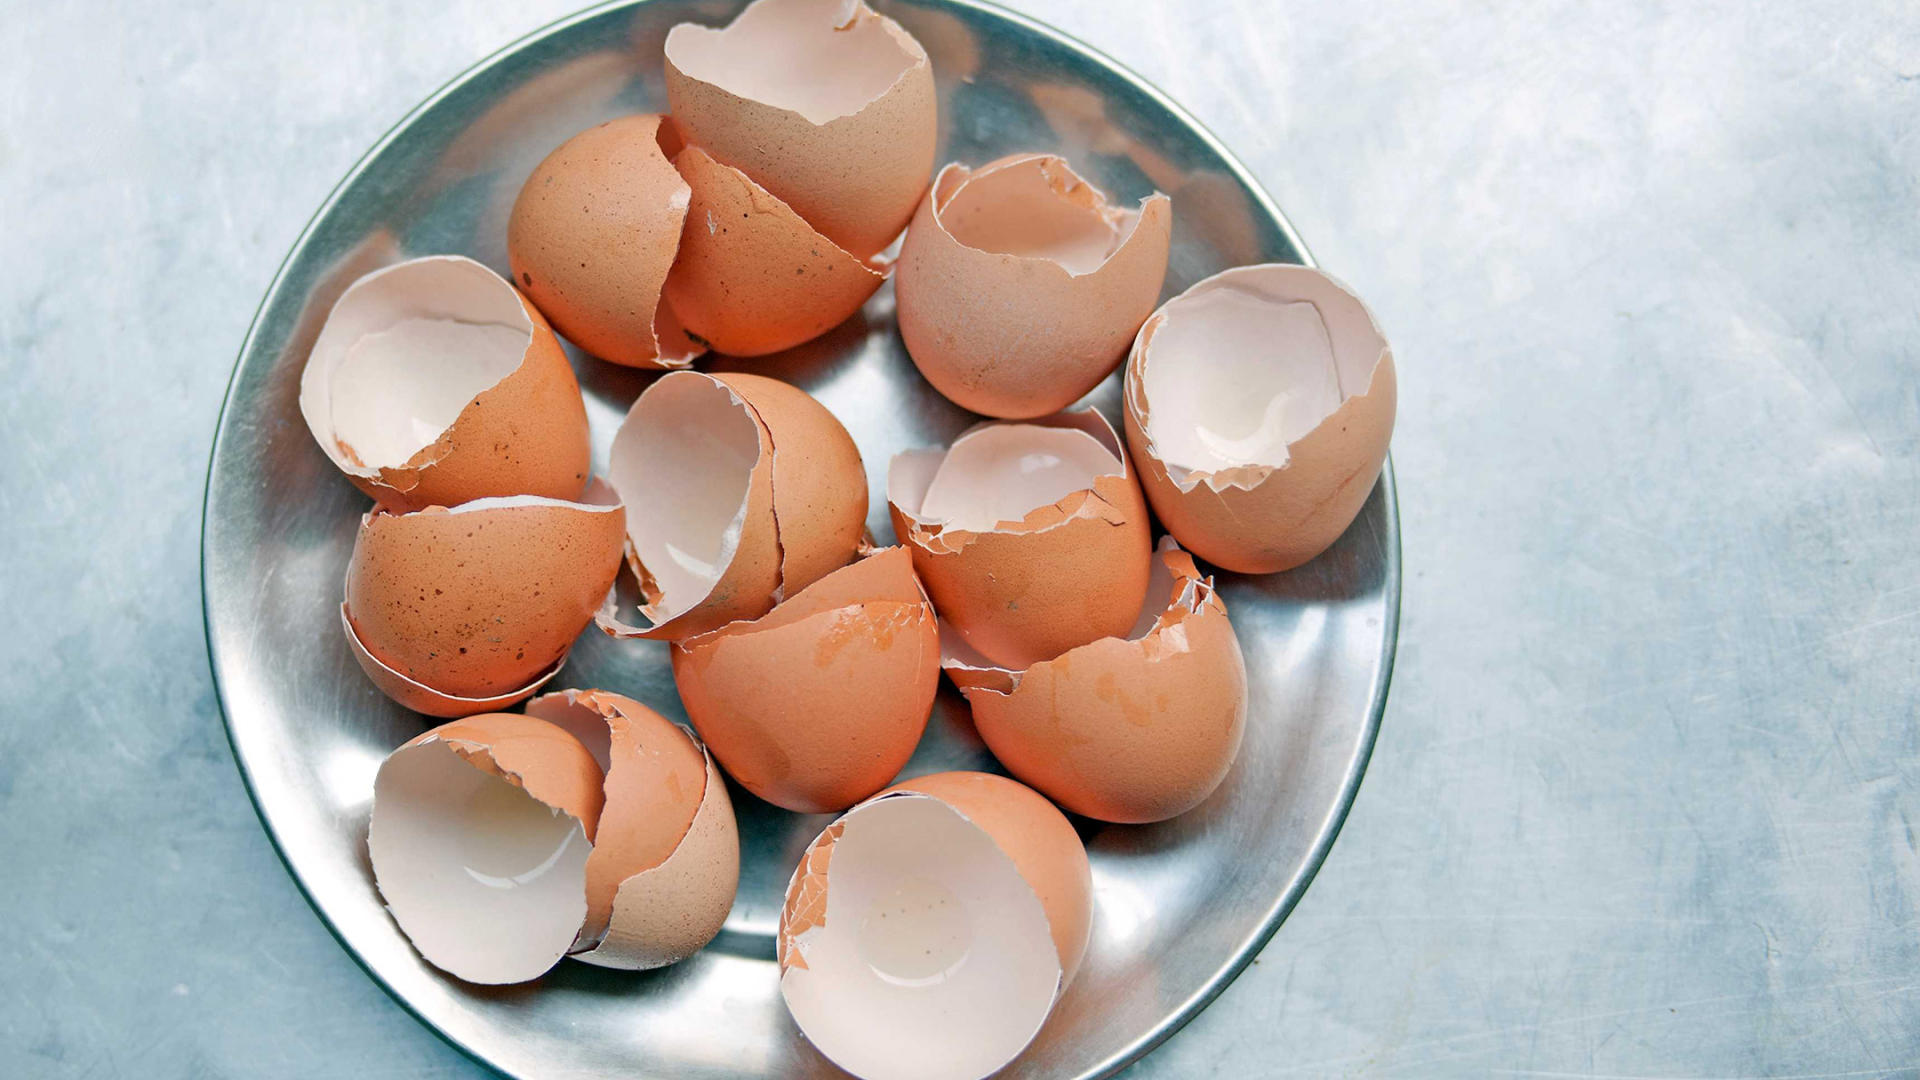 Crushed eggshells on a silver plate